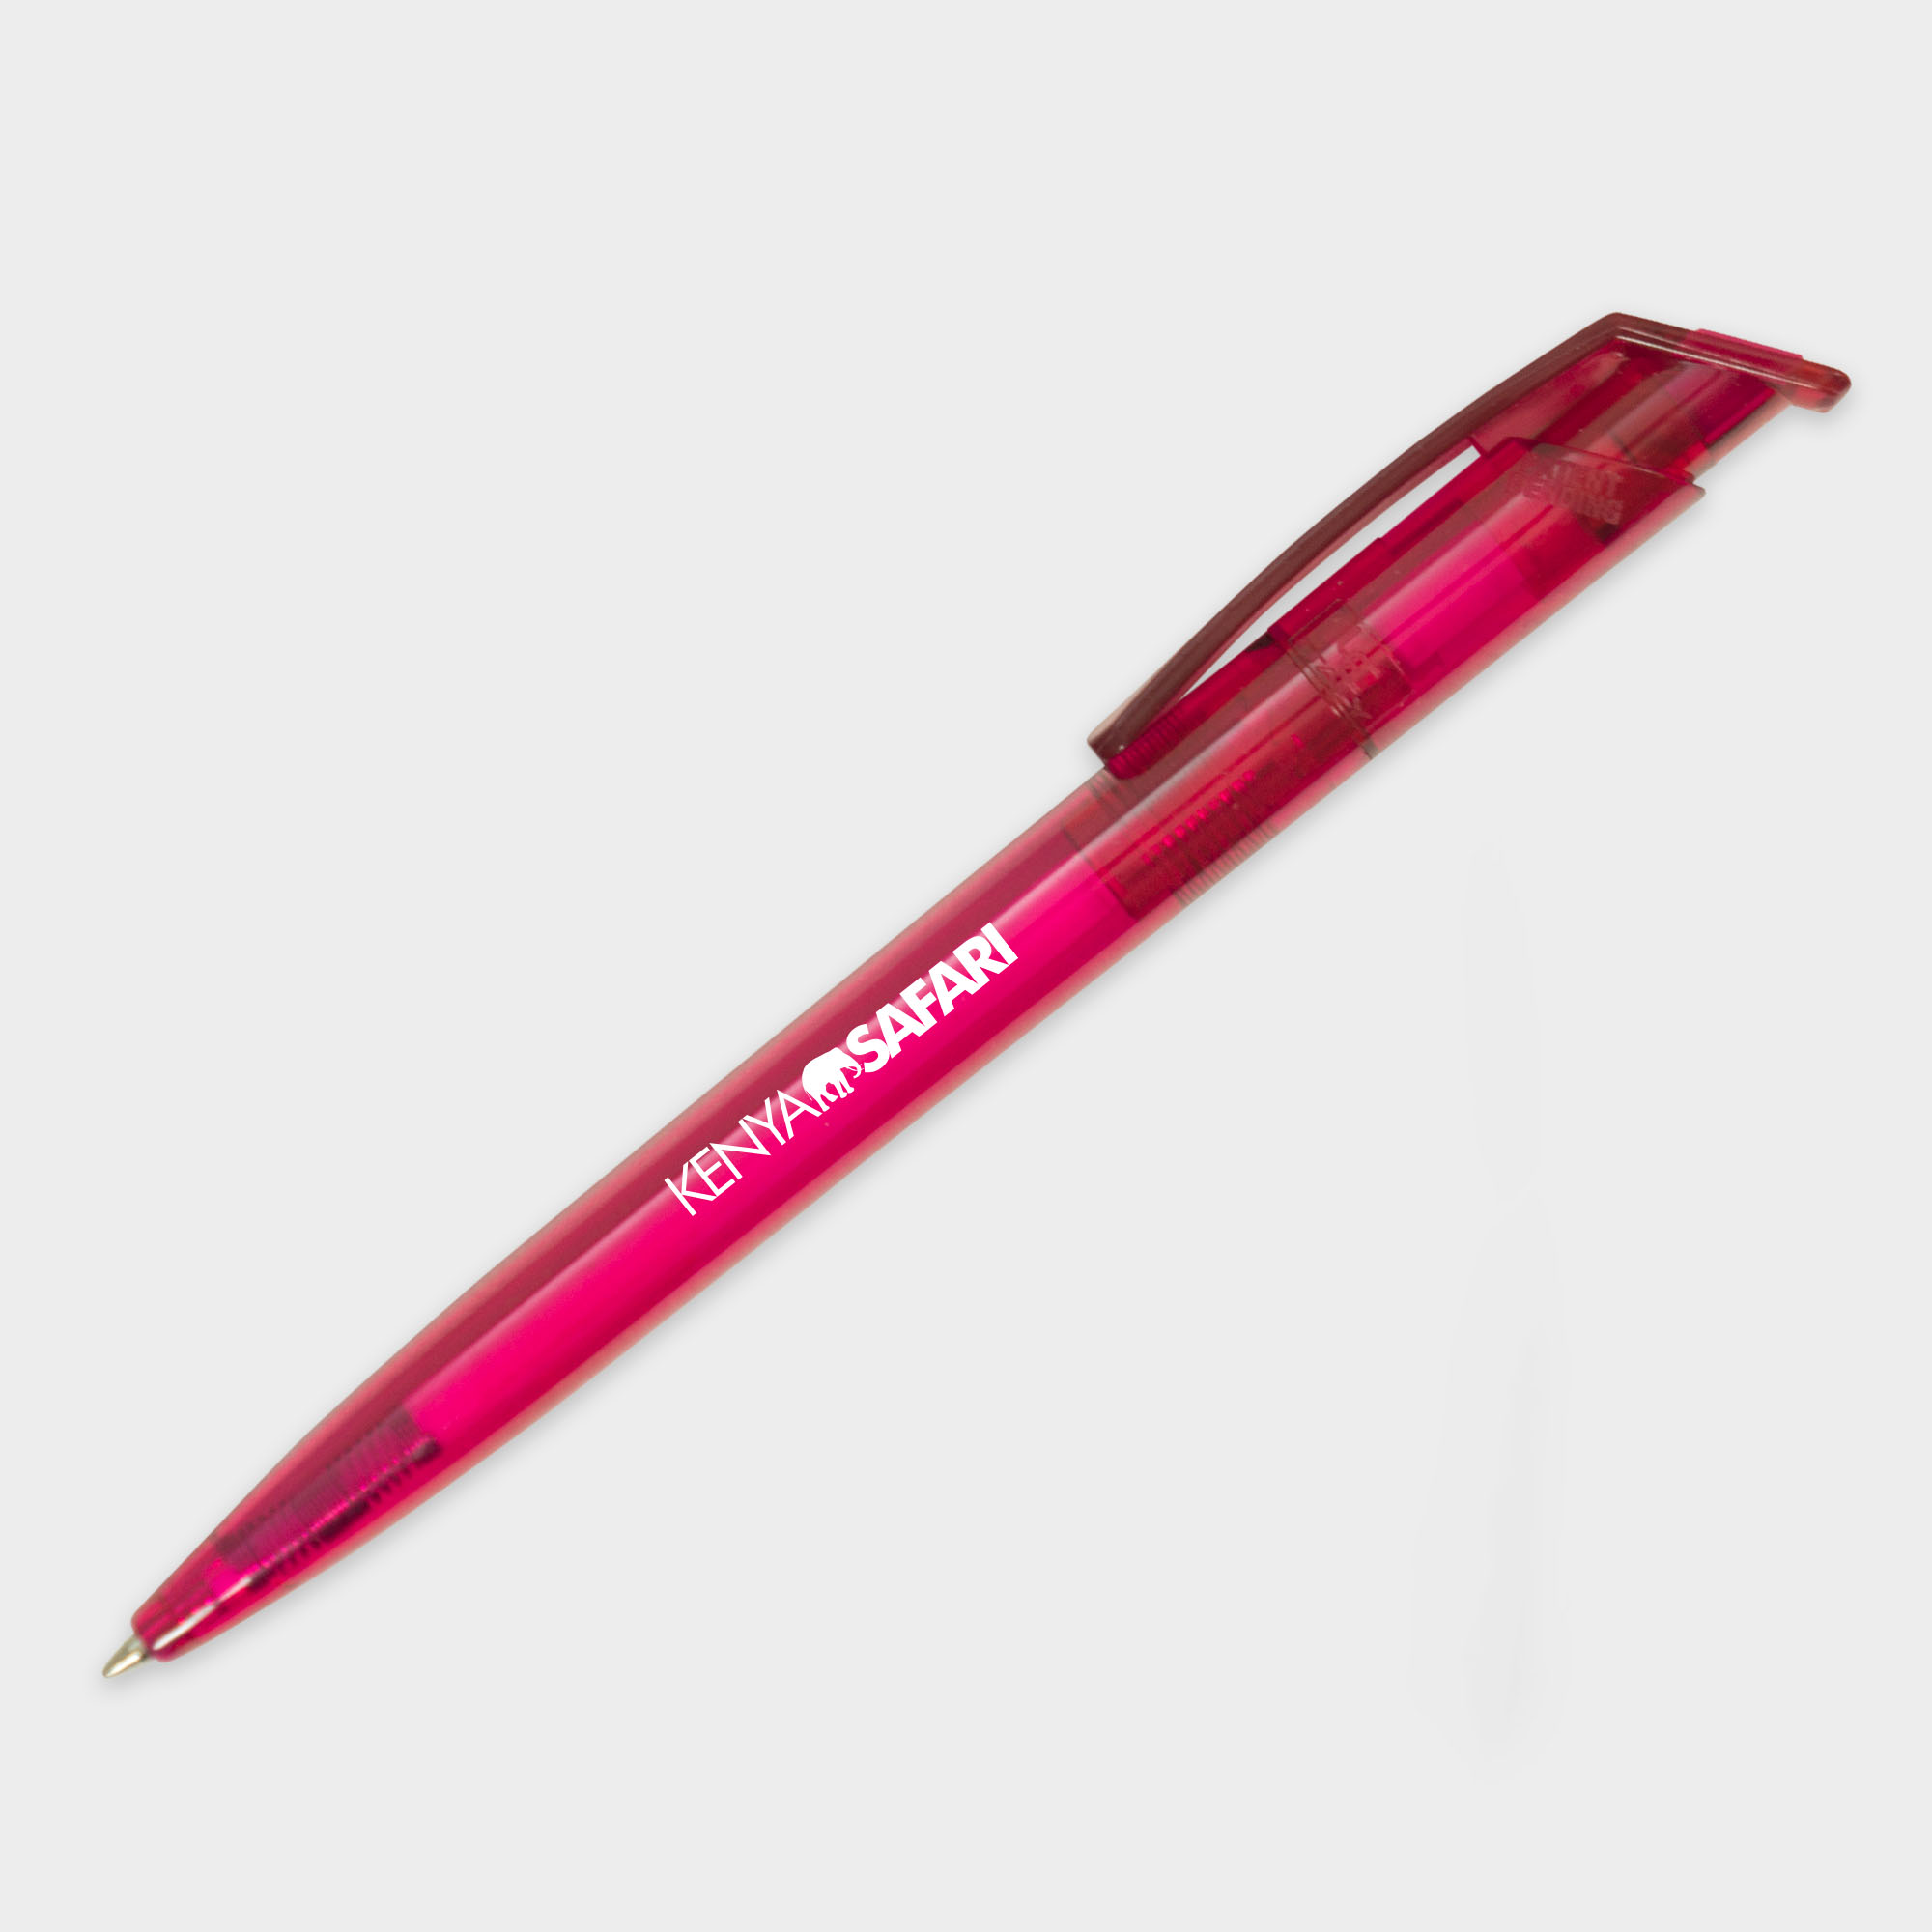 The Green & Good Litani Pen. An eco-friendly and high-quality pen made from recycled plastic bottles (rPET) with black ink refills and a frosted body. Made in the EU and available in a variety of colours. Pink